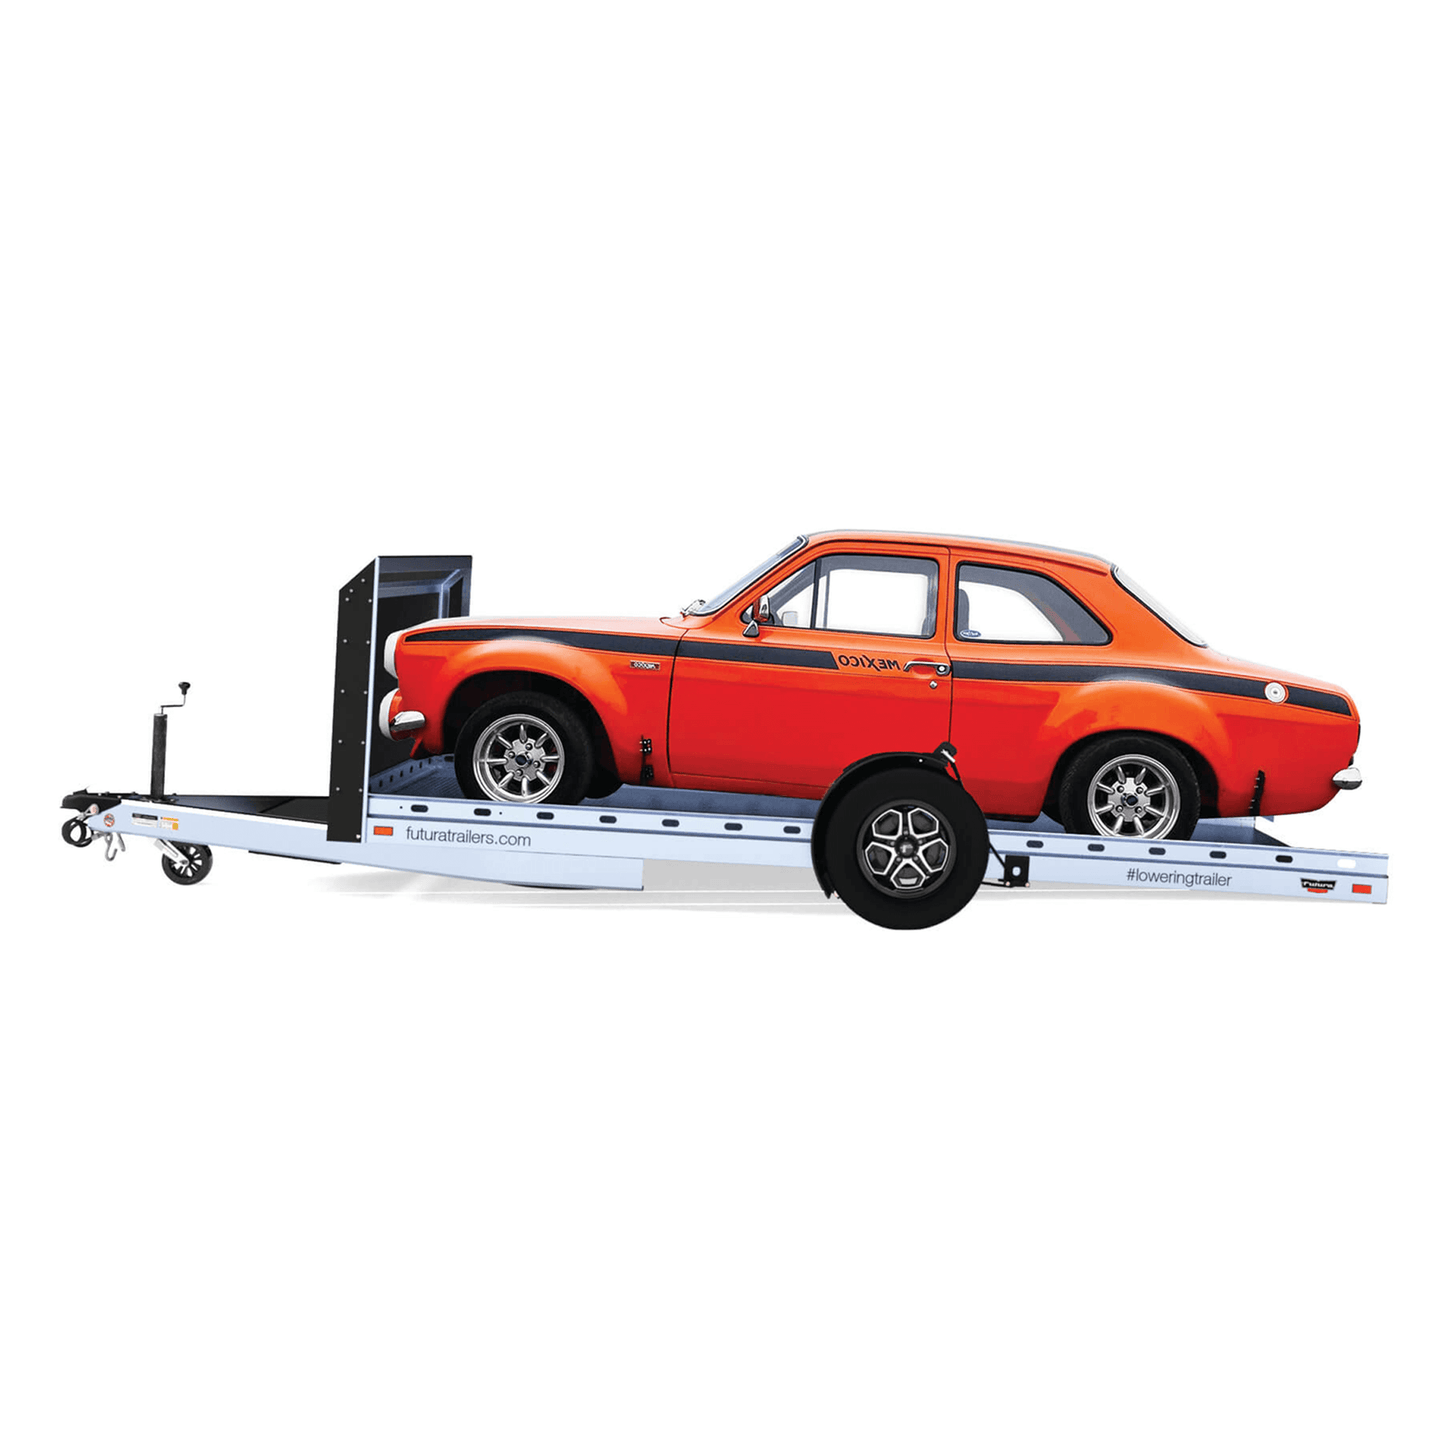 Club Sport Lowering Trailer from $17,895*